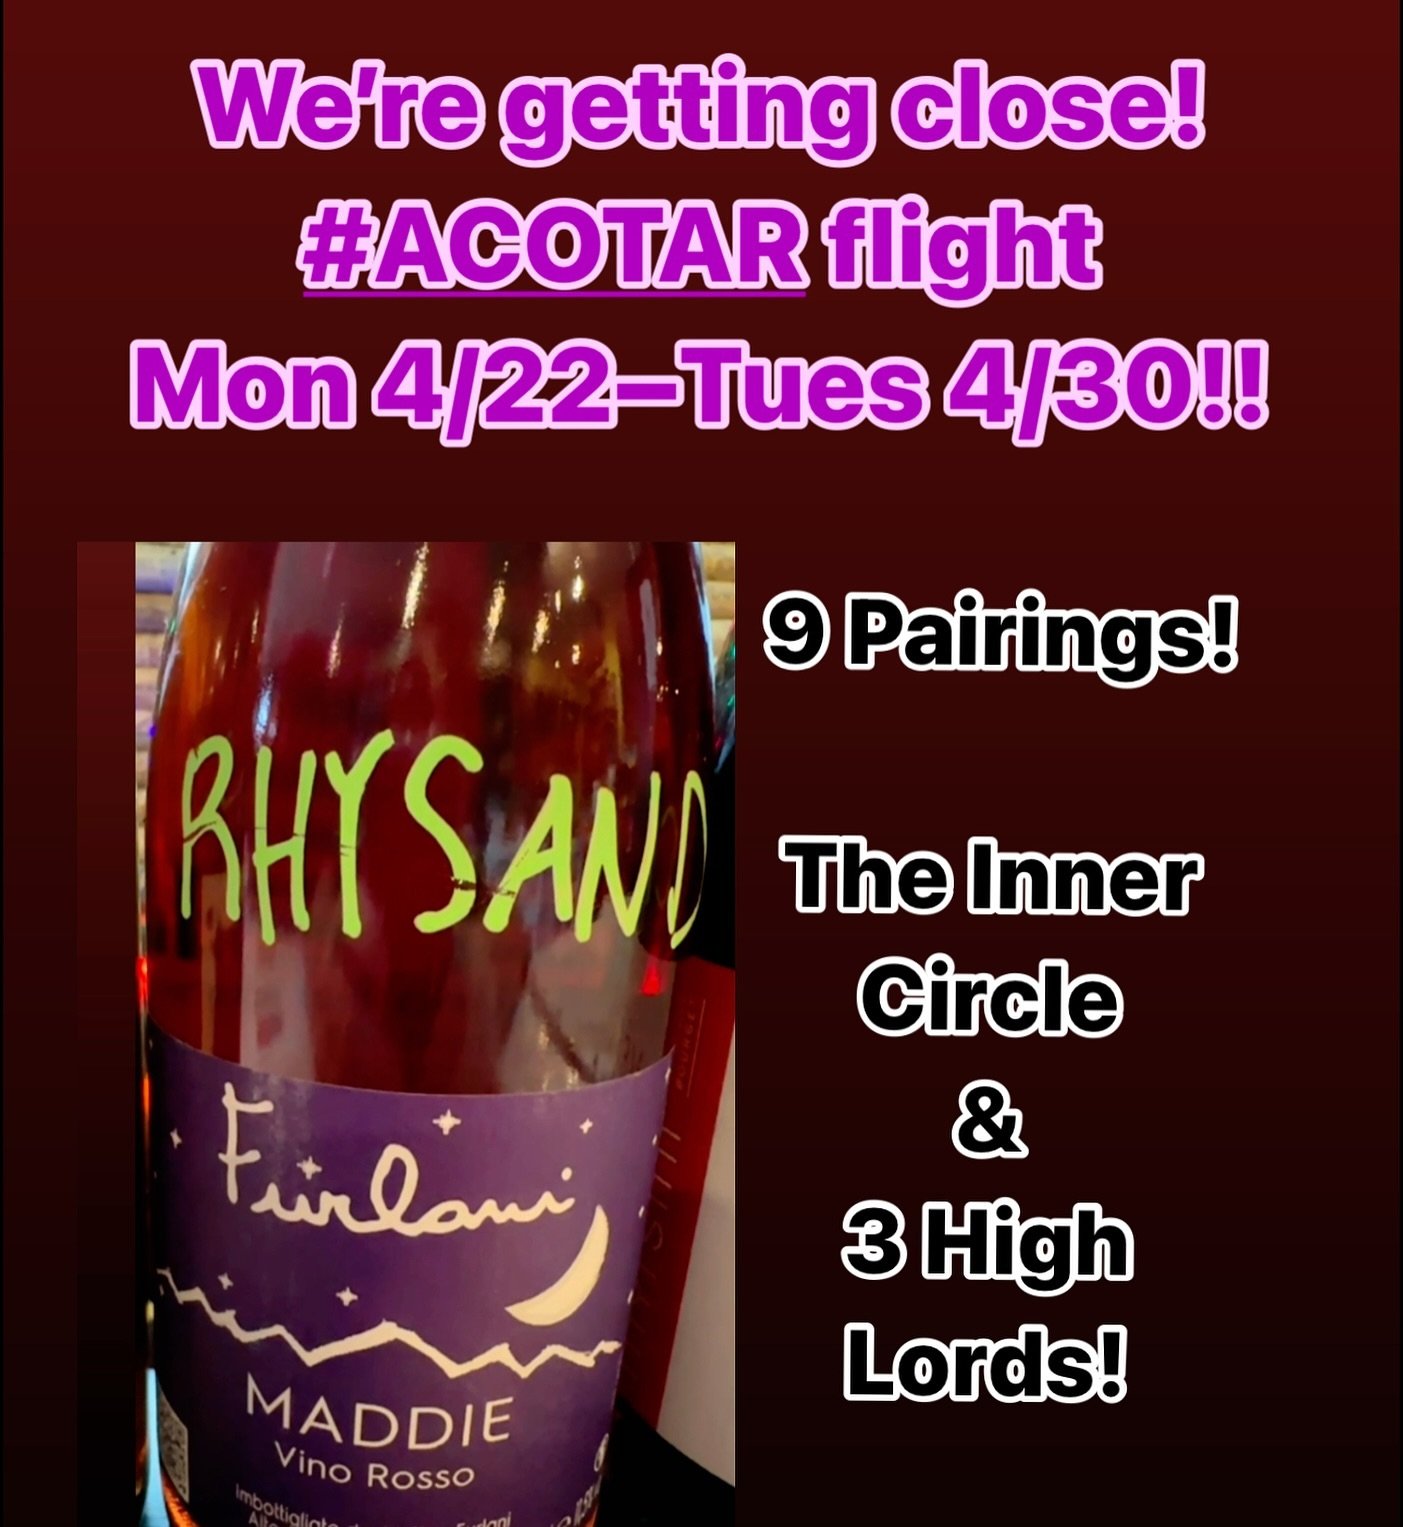 9 pairings inspired by #feyre #rhysand #cassian &amp; 6 others from #sjm #acotar 

If u attended our #pdxevent in February, this #wine tasting adventure includes 8 new wines &amp; 5 new characters!!

We&rsquo;ll also be offering a bonus pour to #tayl